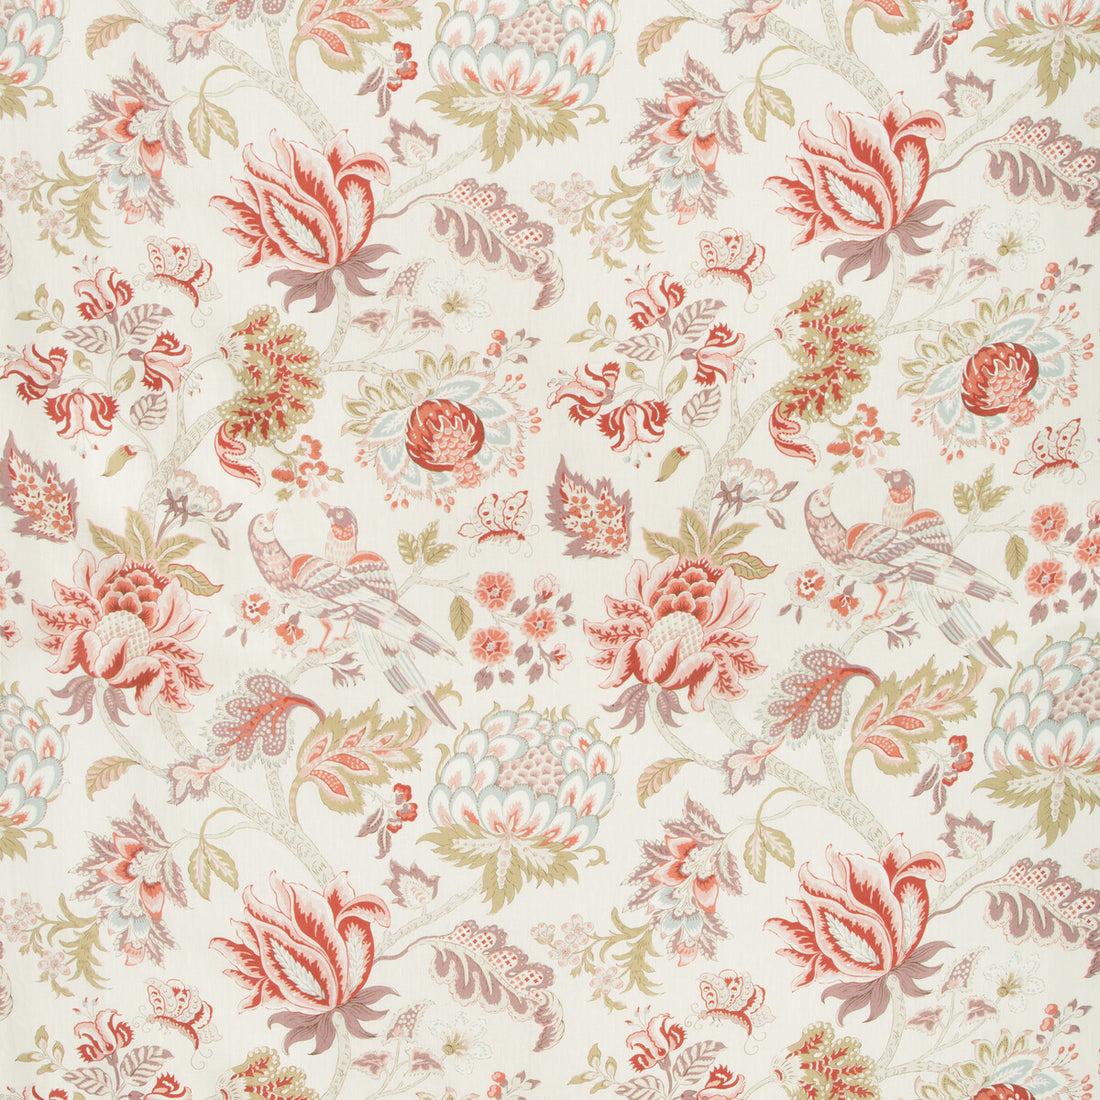 Lambrook fabric in heather color - pattern LAMBROOK.910.0 - by Kravet Basics in the Greenwich collection